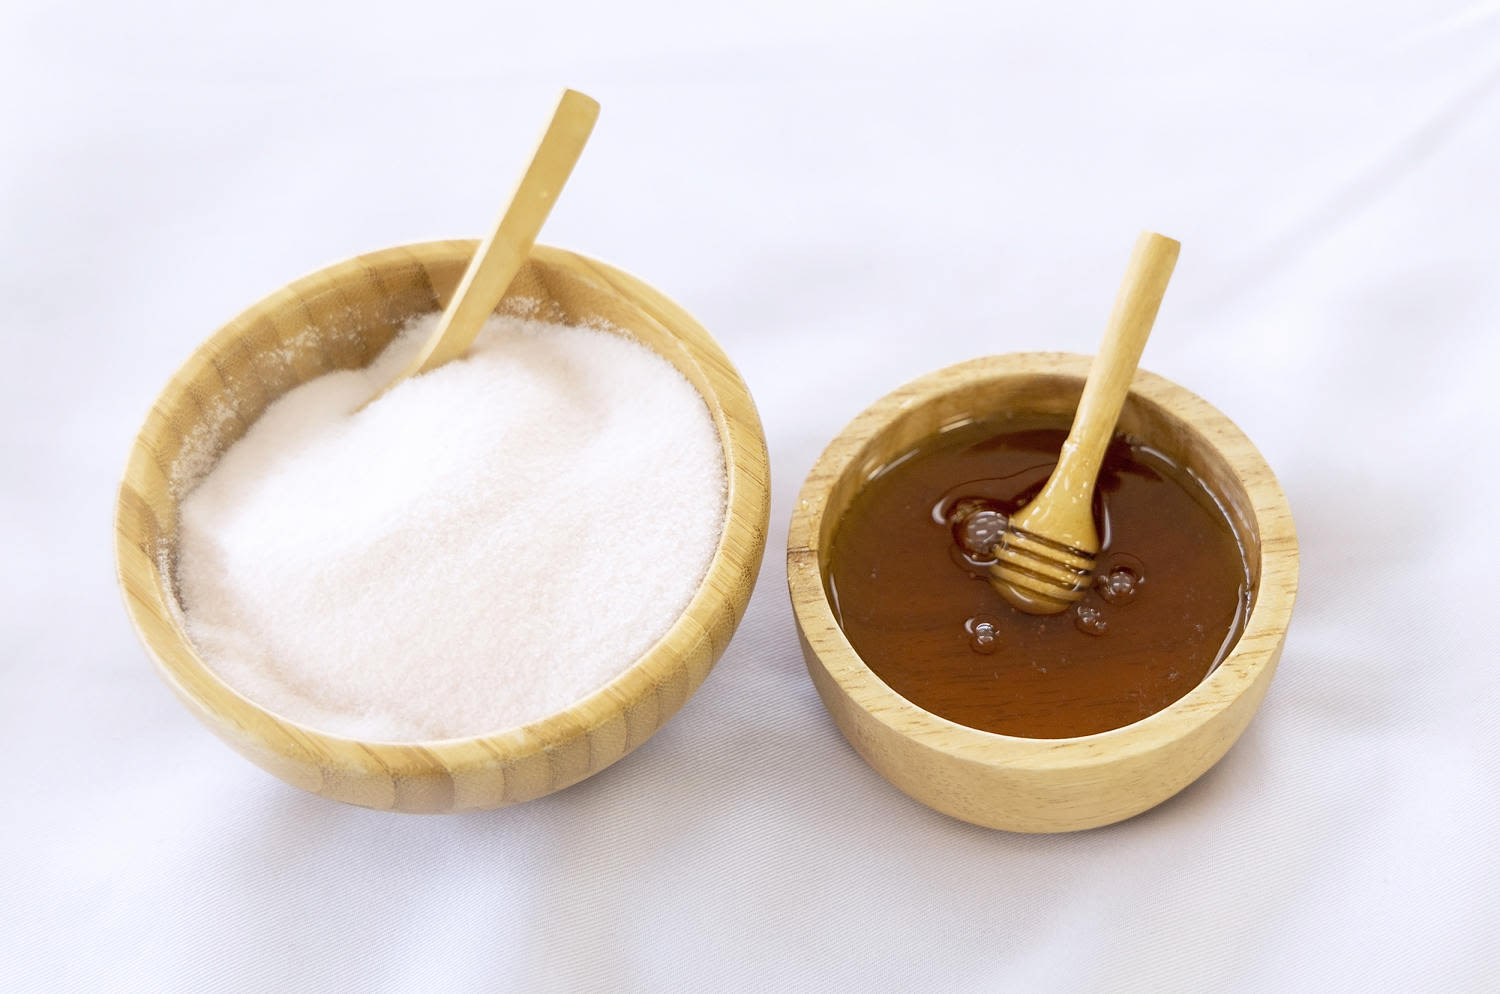 Honey and salt is going viral as a pre-workout snack. A dietitian reveals if it's worth trying